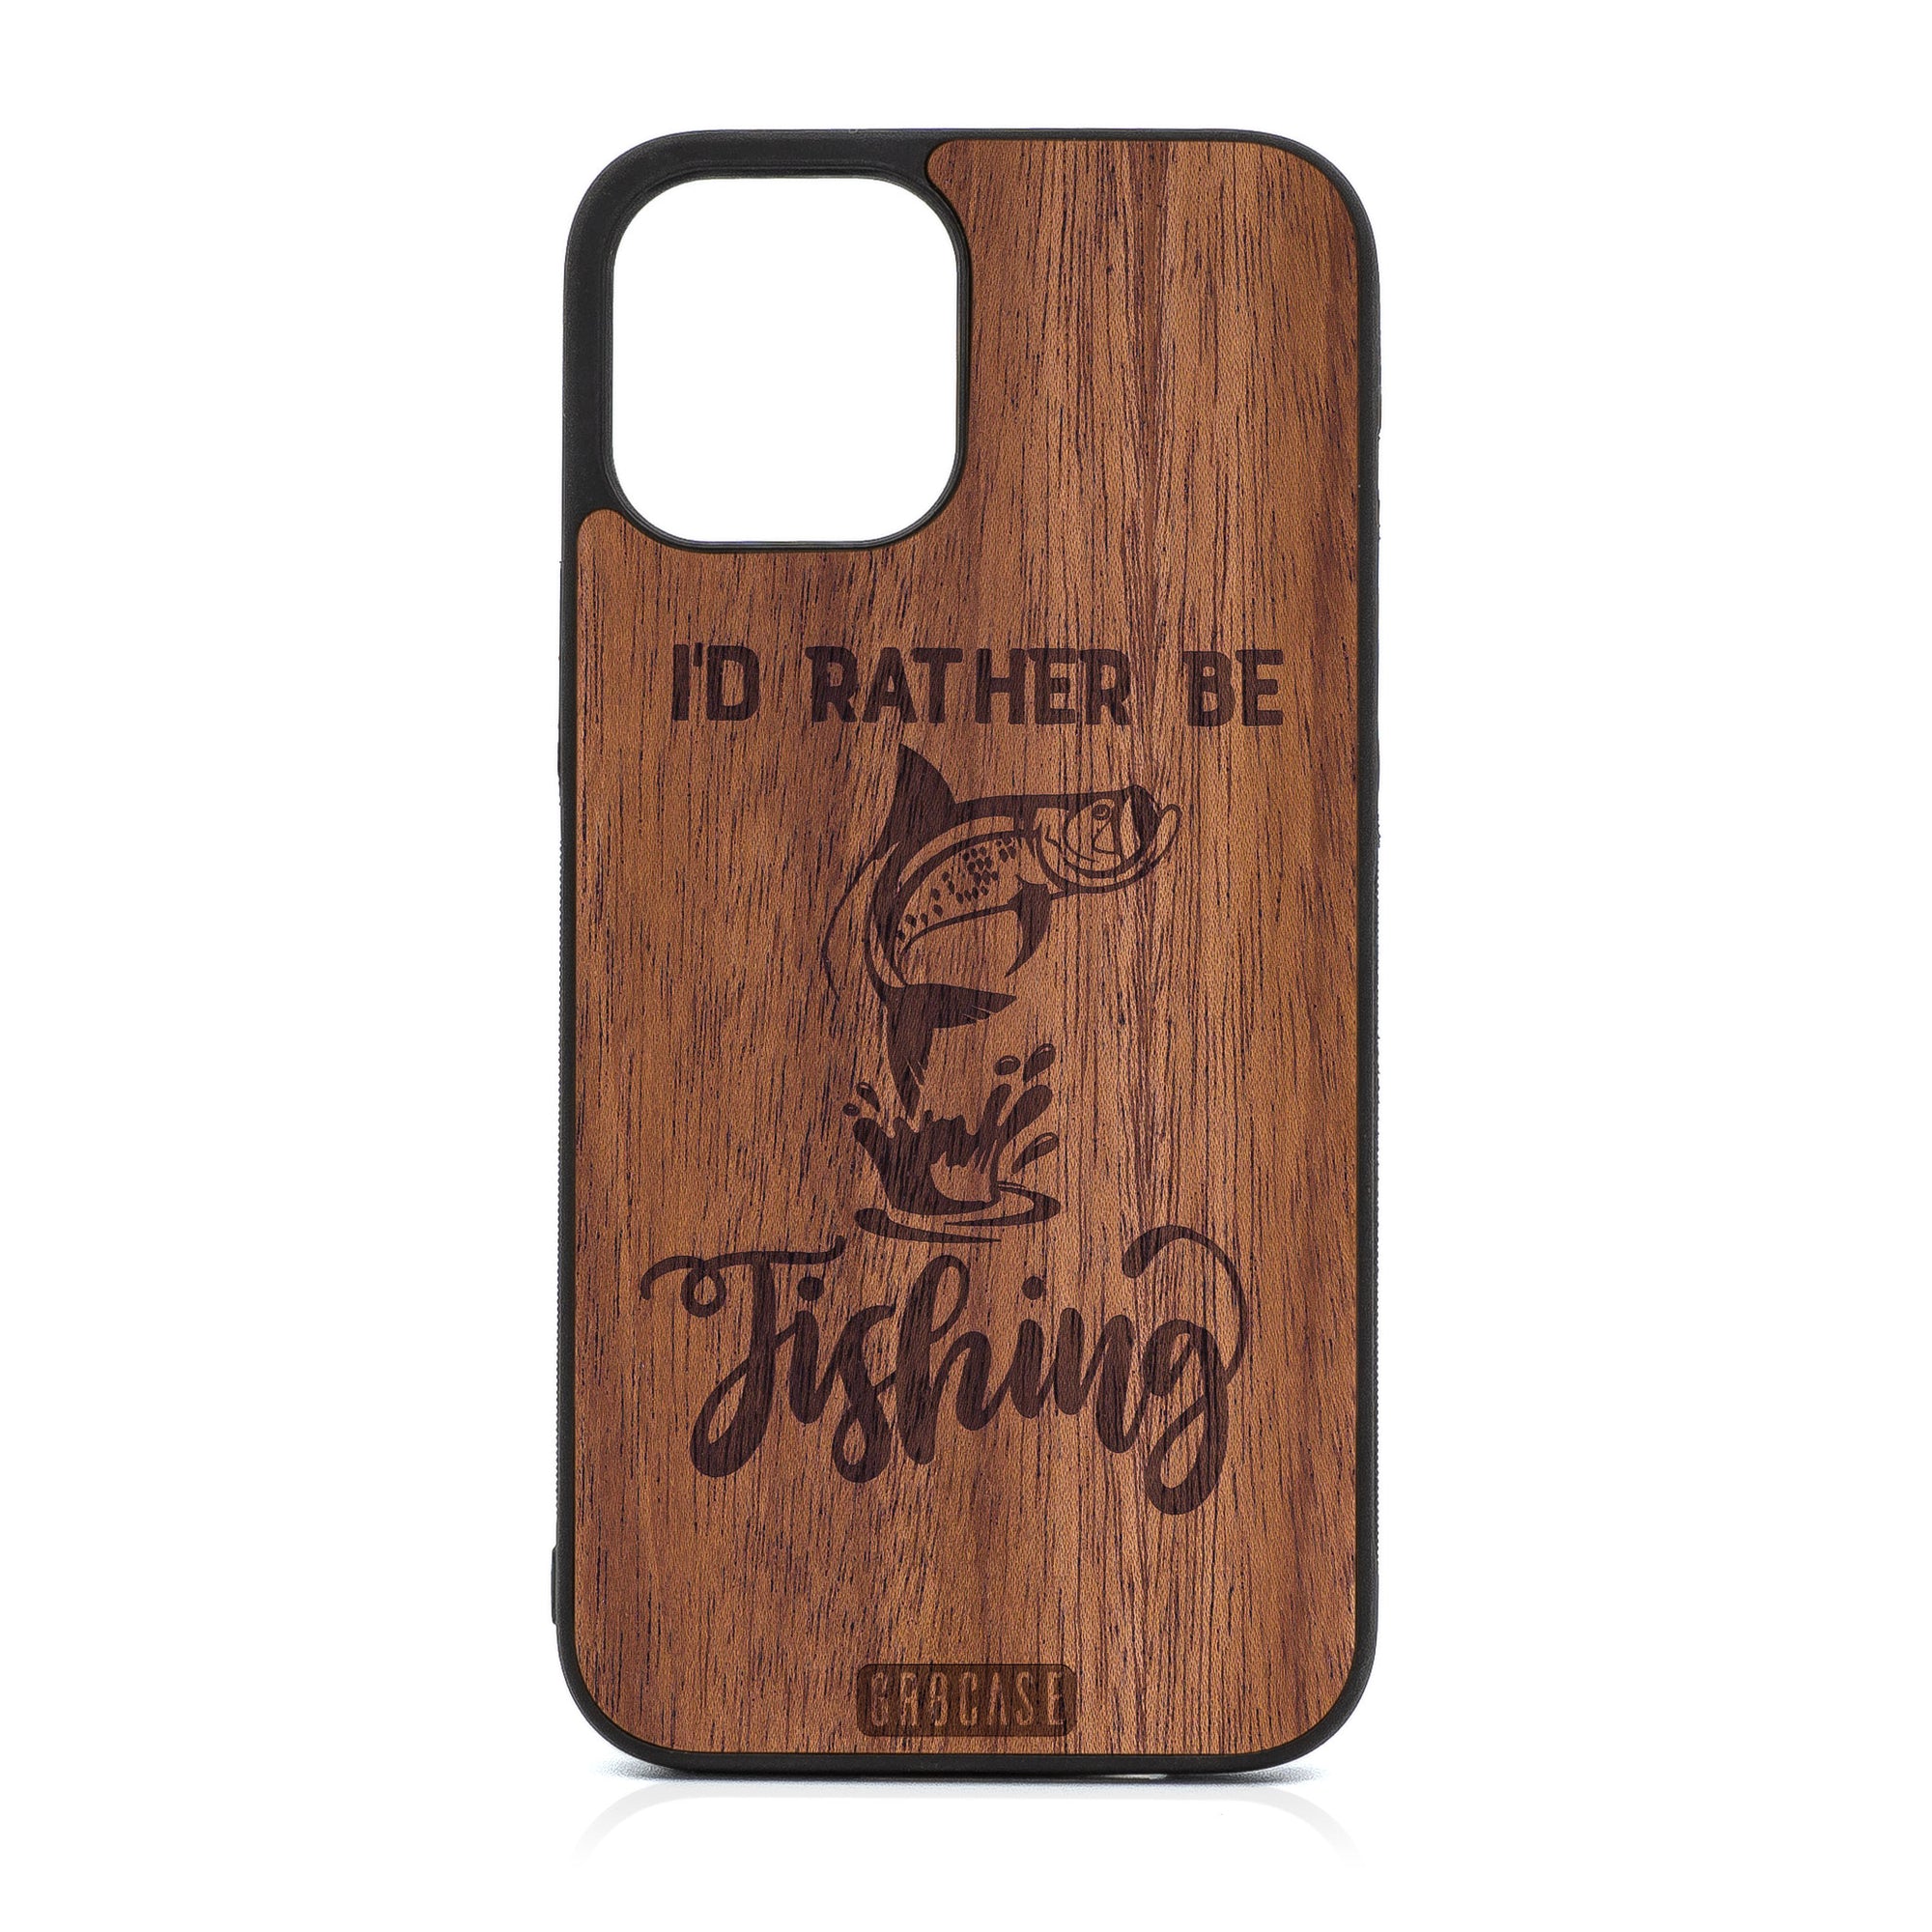 I'D Rather Be Fishing Design Wood Case For iPhone 12 Pro Max